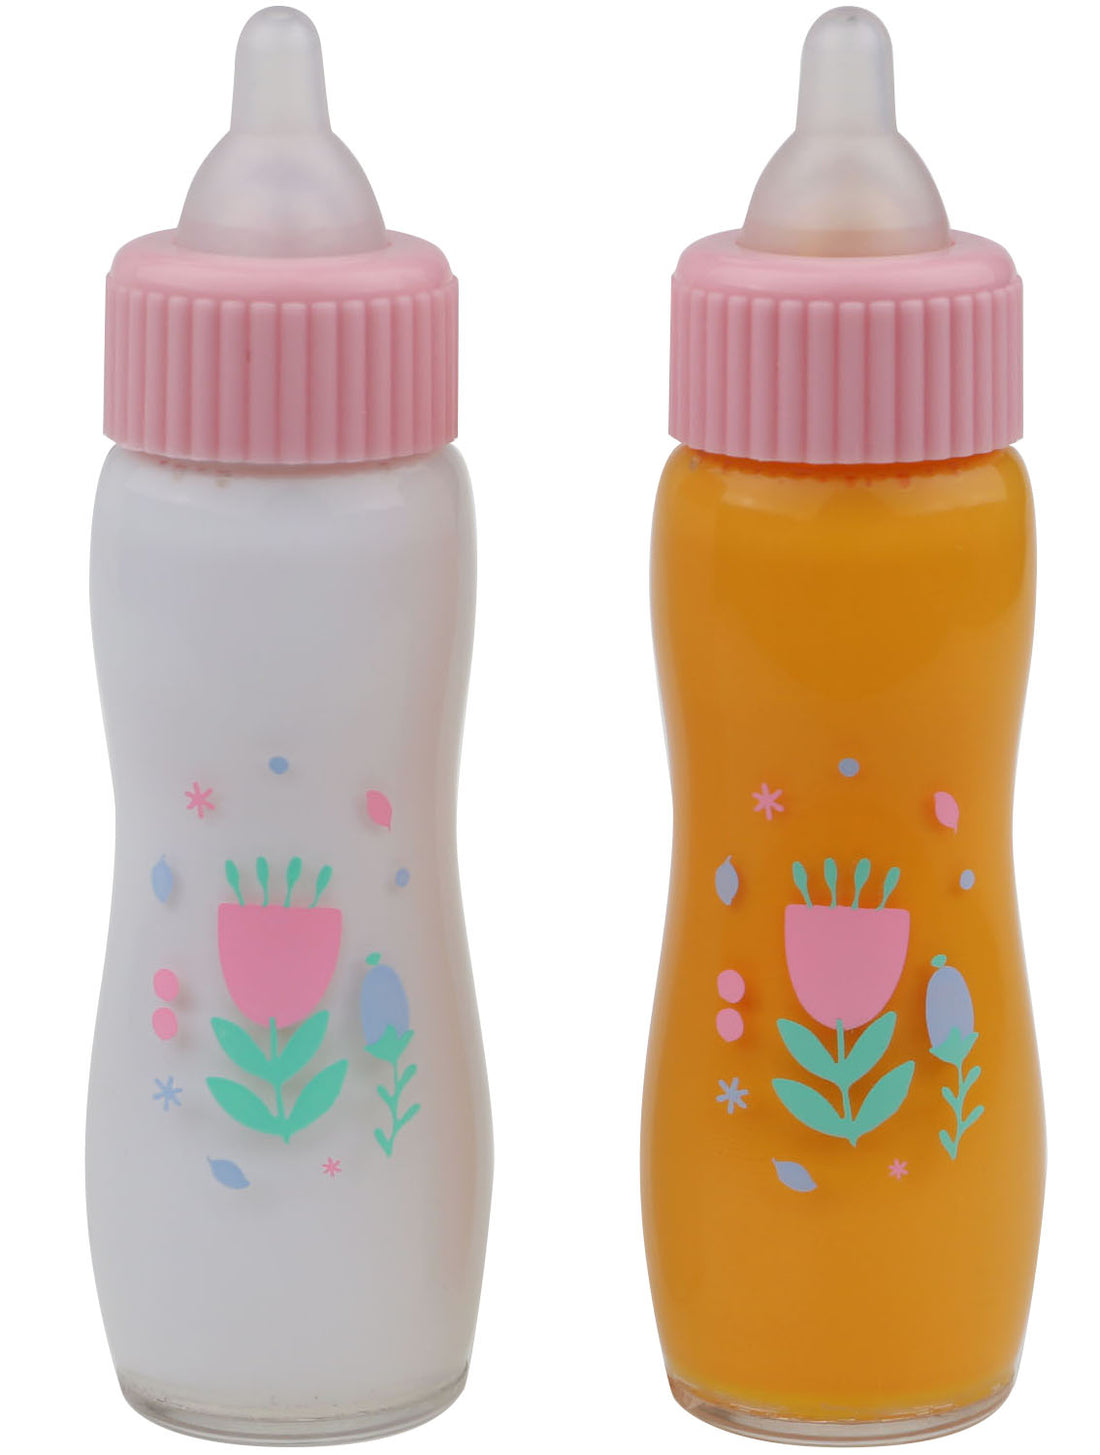 For Keeps! Magic Milk and Juice Baby Bottles